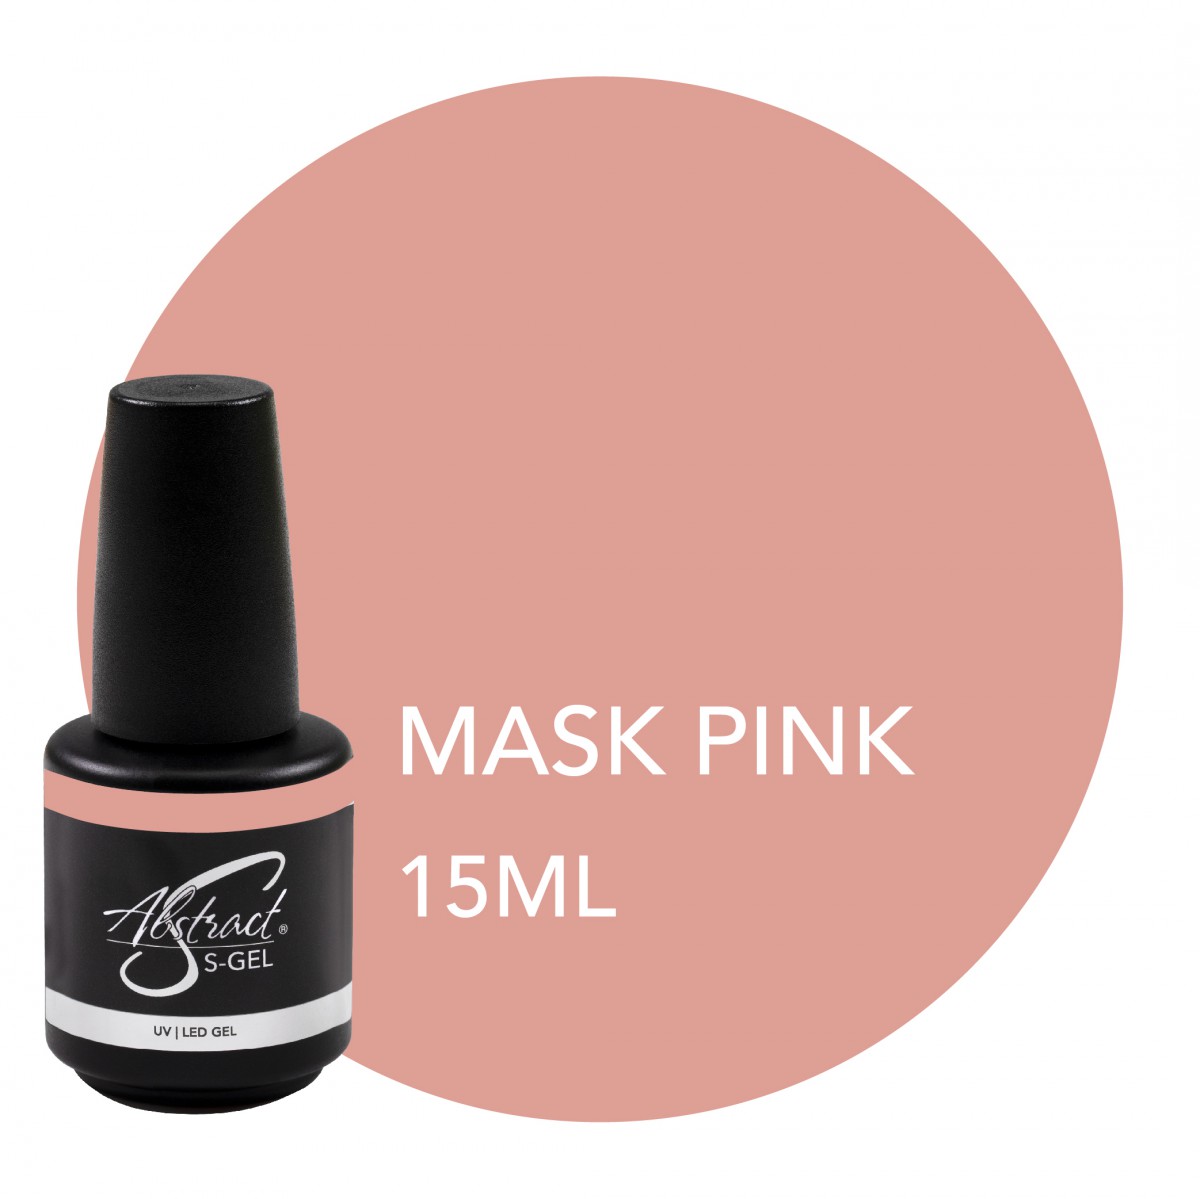 Abstract S-Gel Mask Pink